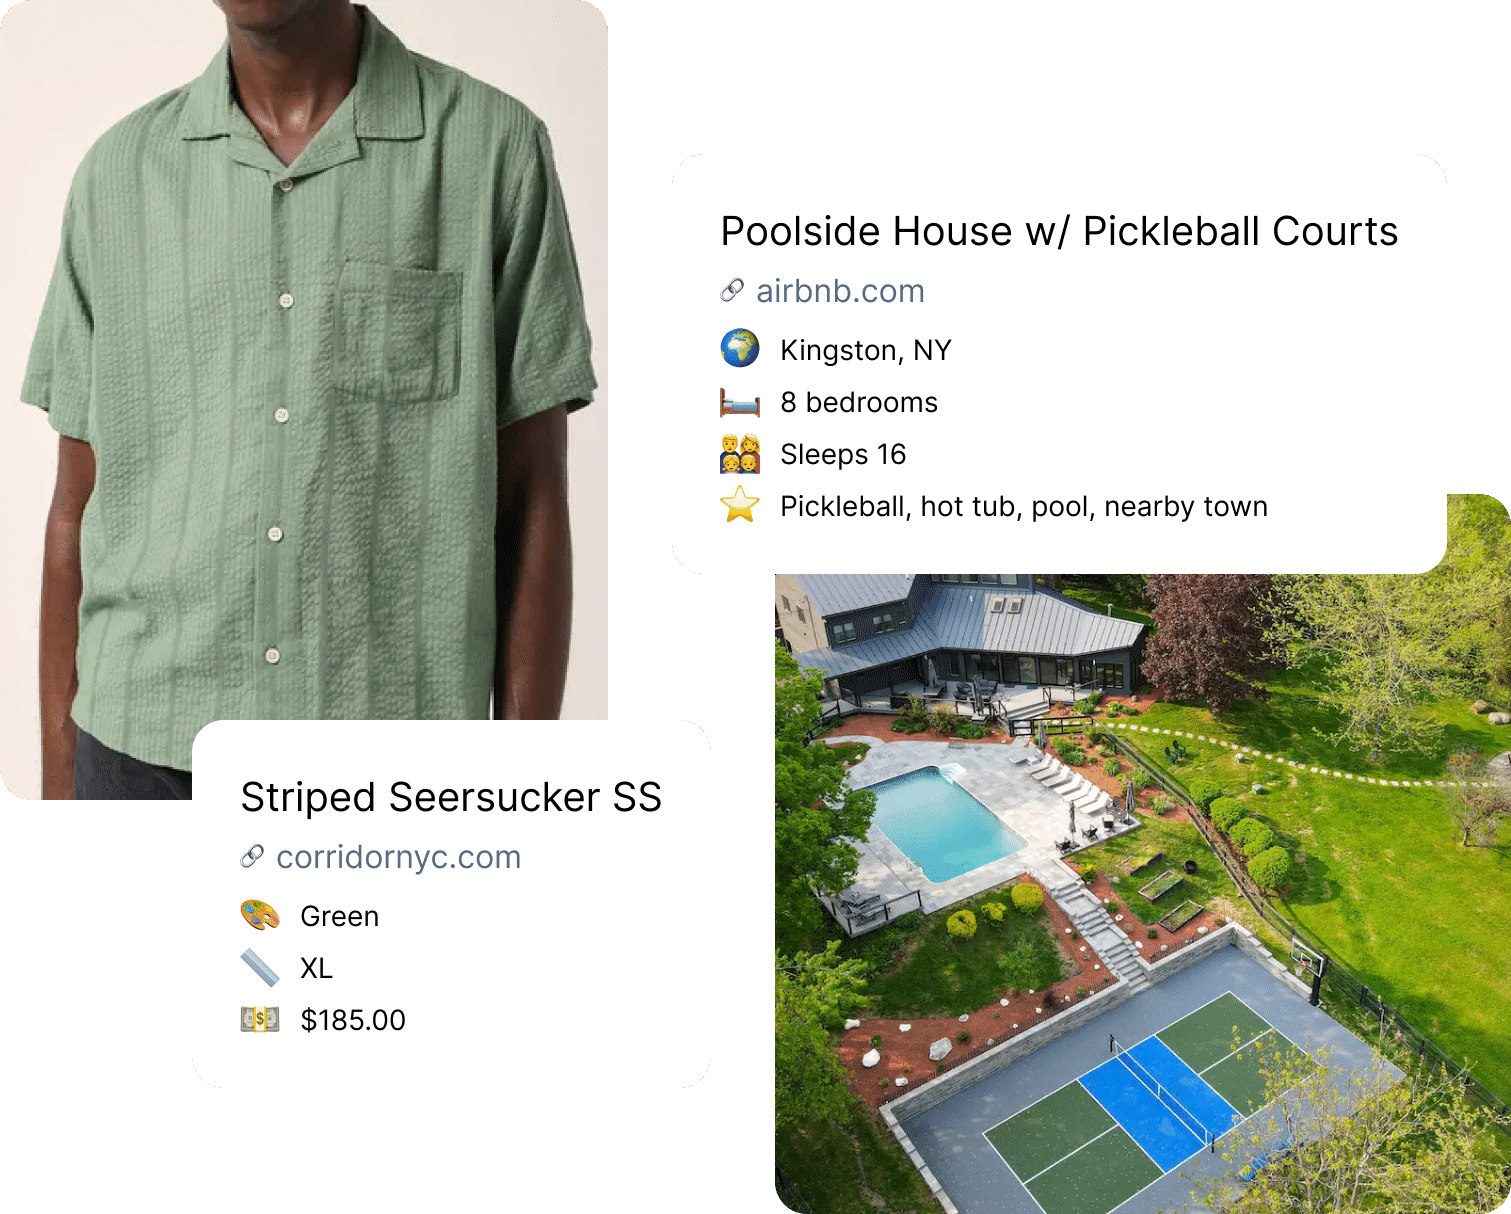 Two jots, one a shirt with the color, size and price; the other a large rentable house with location, number of beds, number of guests, and property highlights.